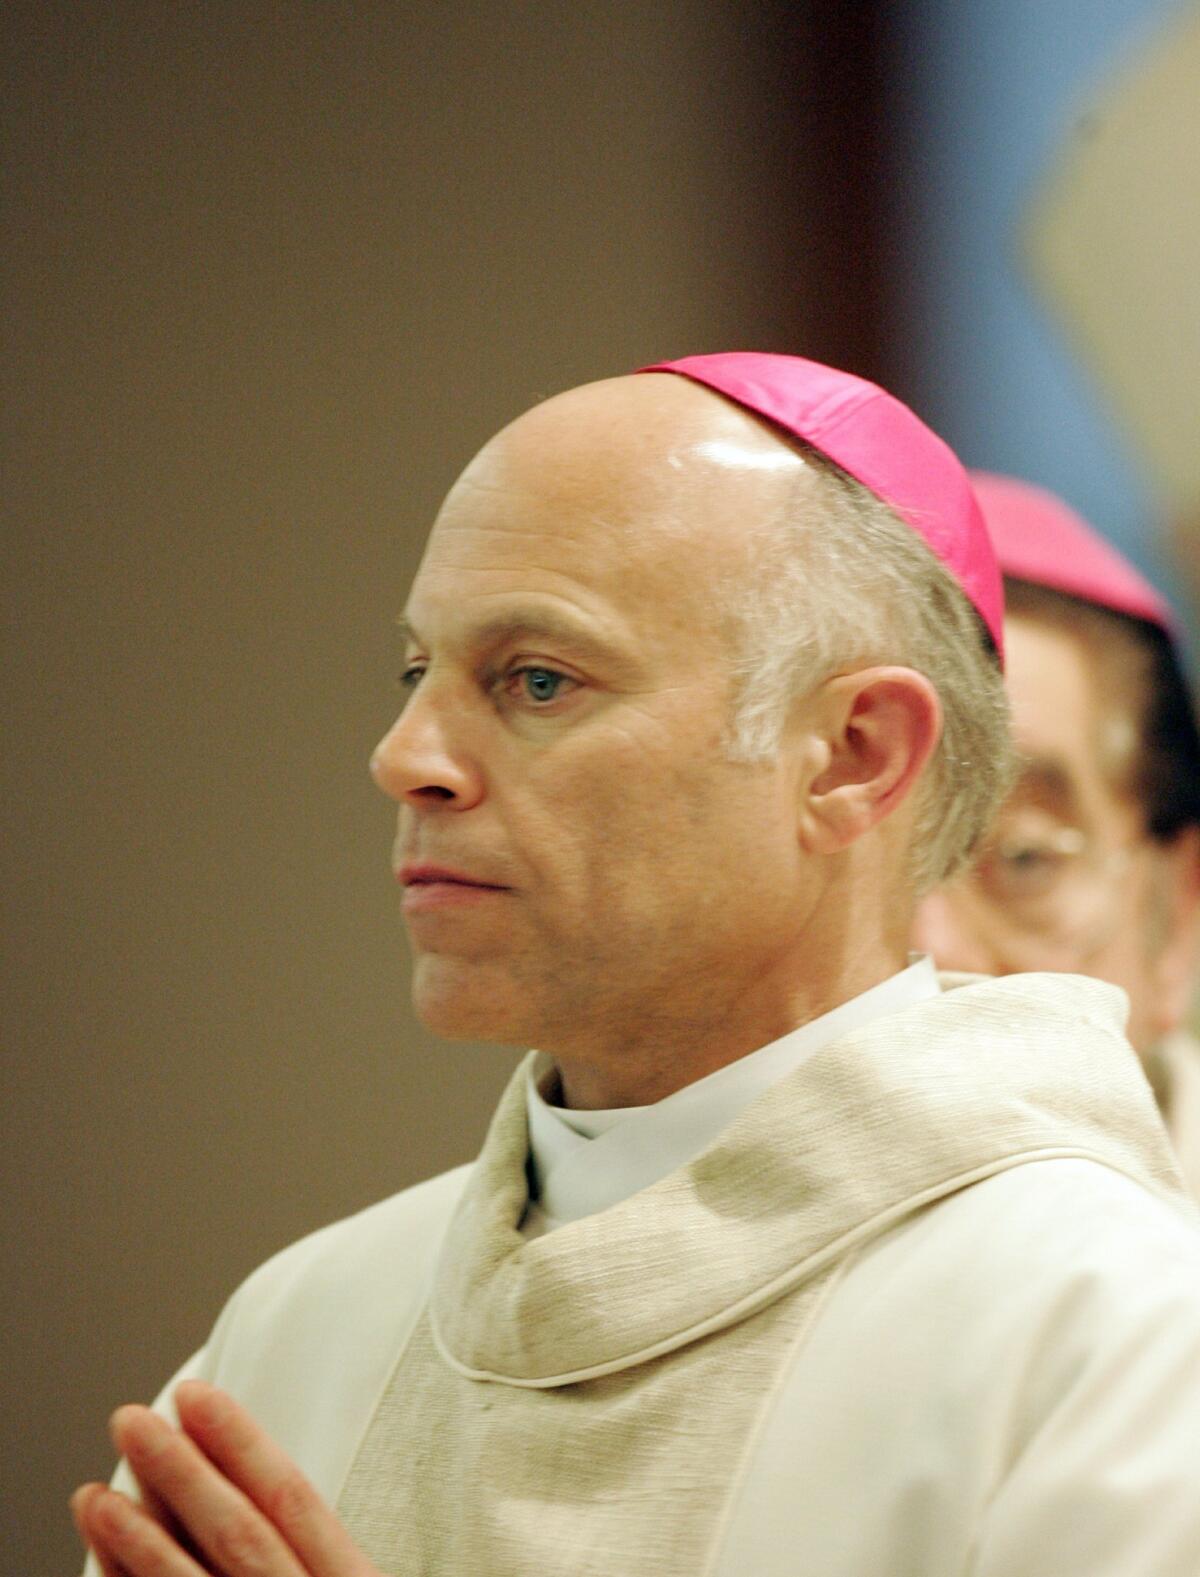 This photo of Archbishop-elect Salvatore Cordileone was taken in March, 2007 at a mass at the Church of the Good Shepherd in Mira Mesa. — U-T San Diego